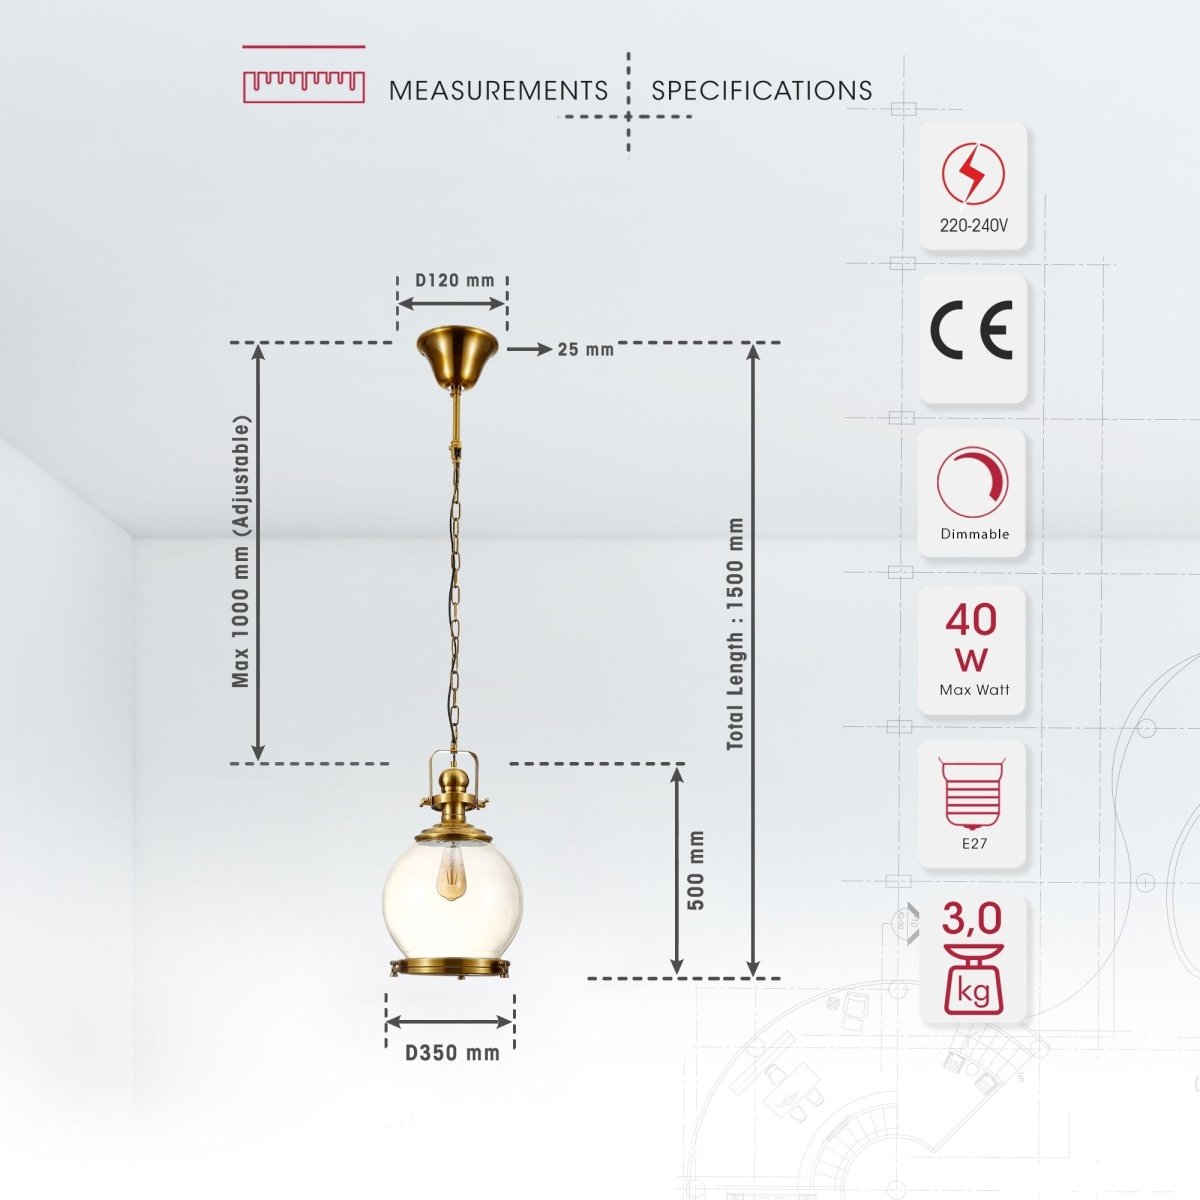 Product dimensions of golden bronze metal amber glass globe pendant light sealed with e27 fitting